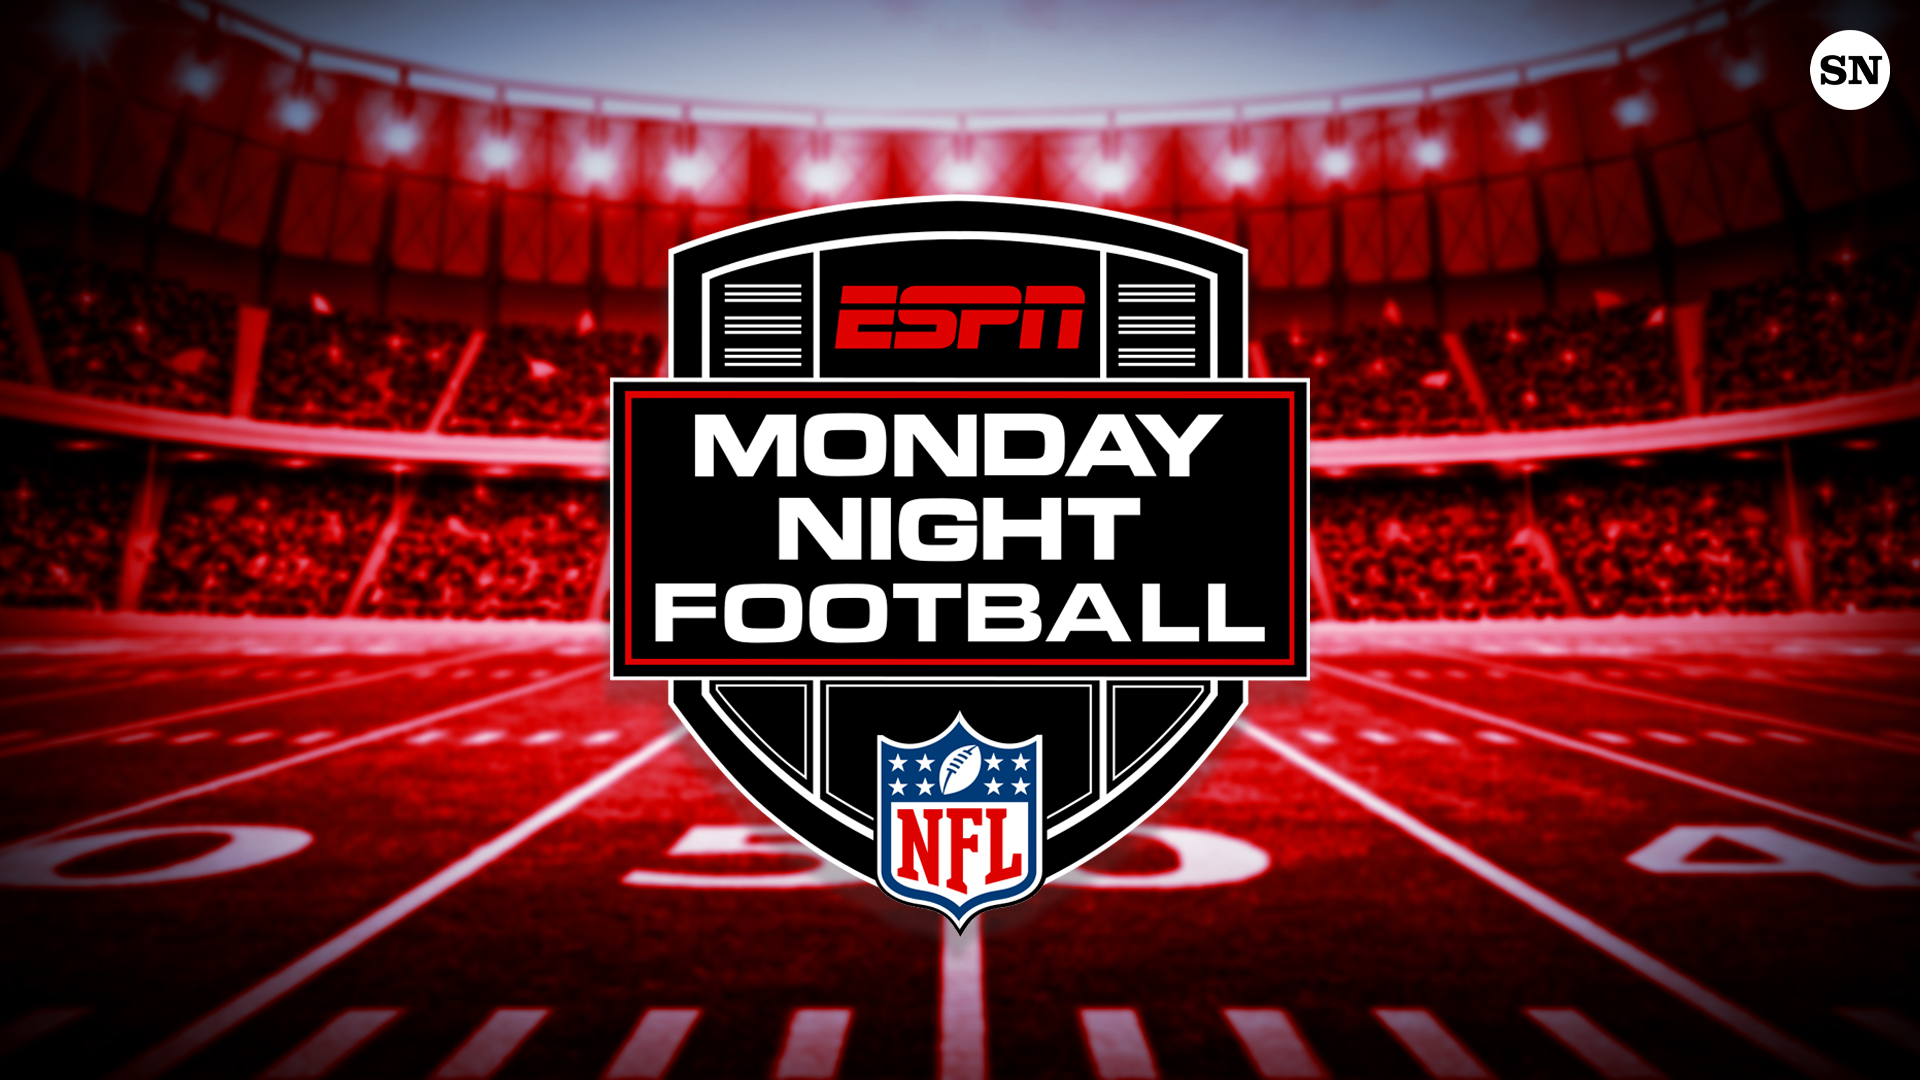 why isn't the nfl game on espn tonight? explaining week 17 broadcast shakeup for new year's day